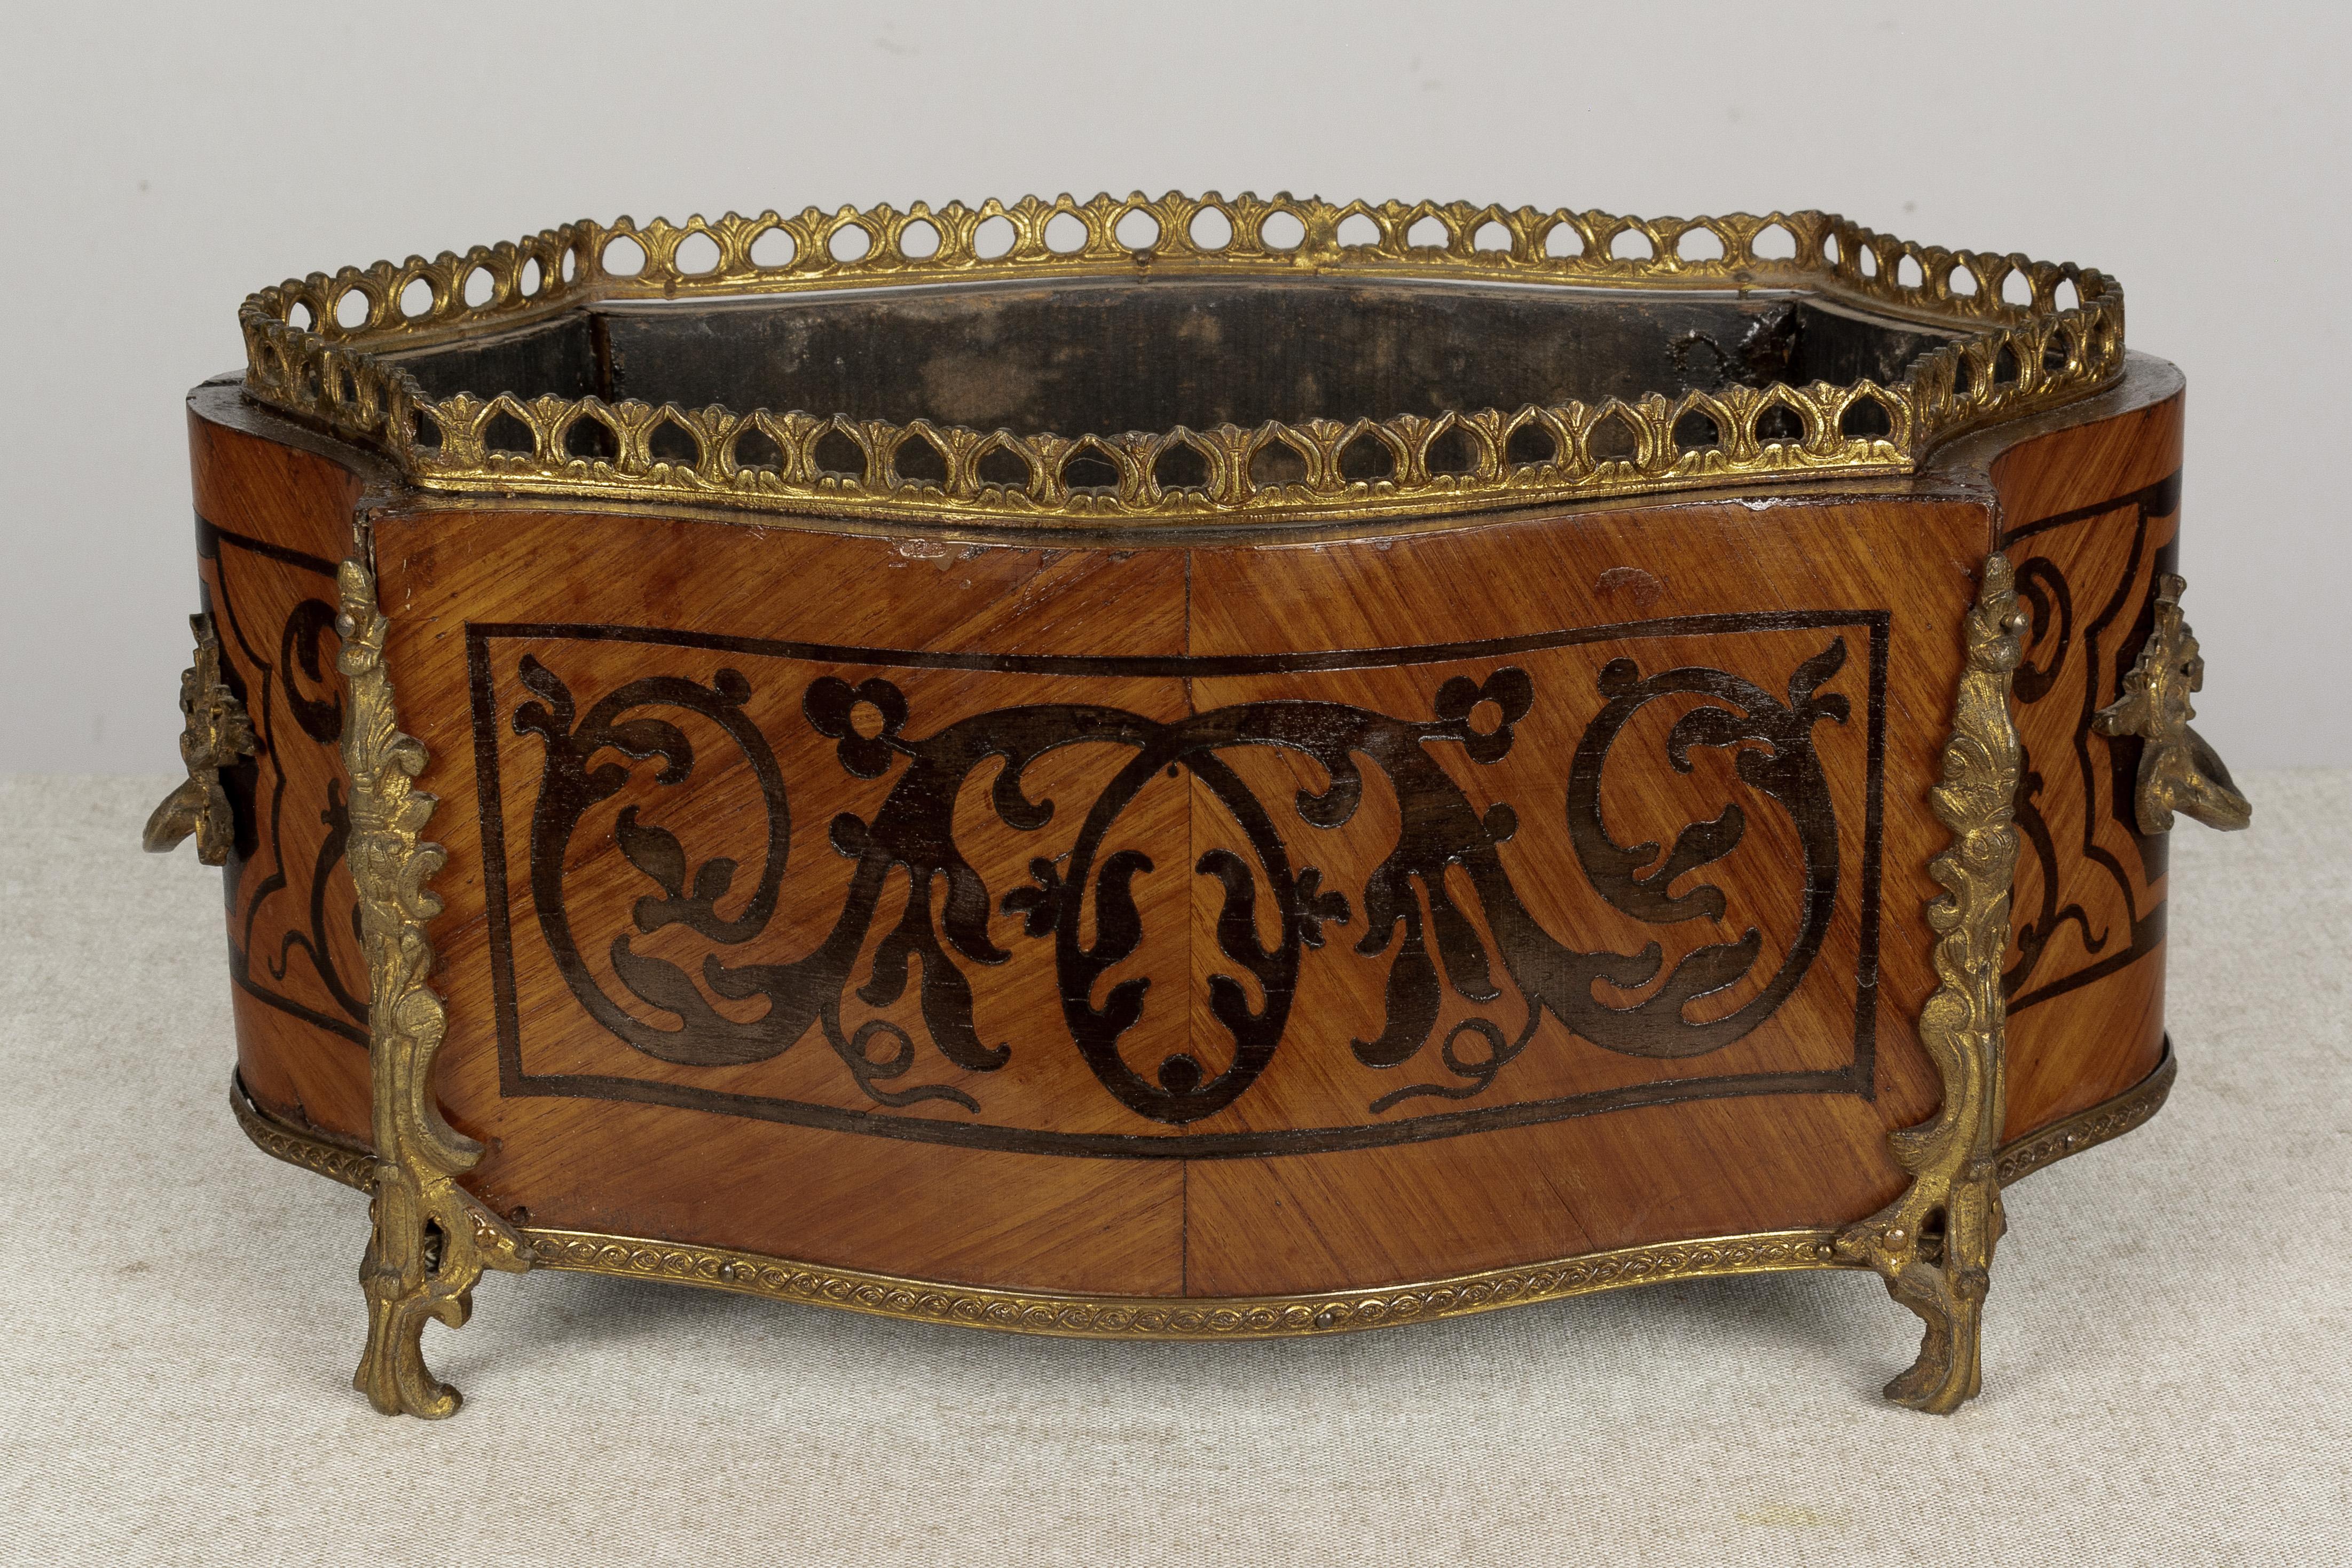 A 19th century Napoleon III style marquetry jardinière, or planter, made of veneer of mahogany with inlaid design. Bronze-mounted with two handles, gallery and corner ornaments. Missing the zinc liner. A beautiful planter for the display of orchids.